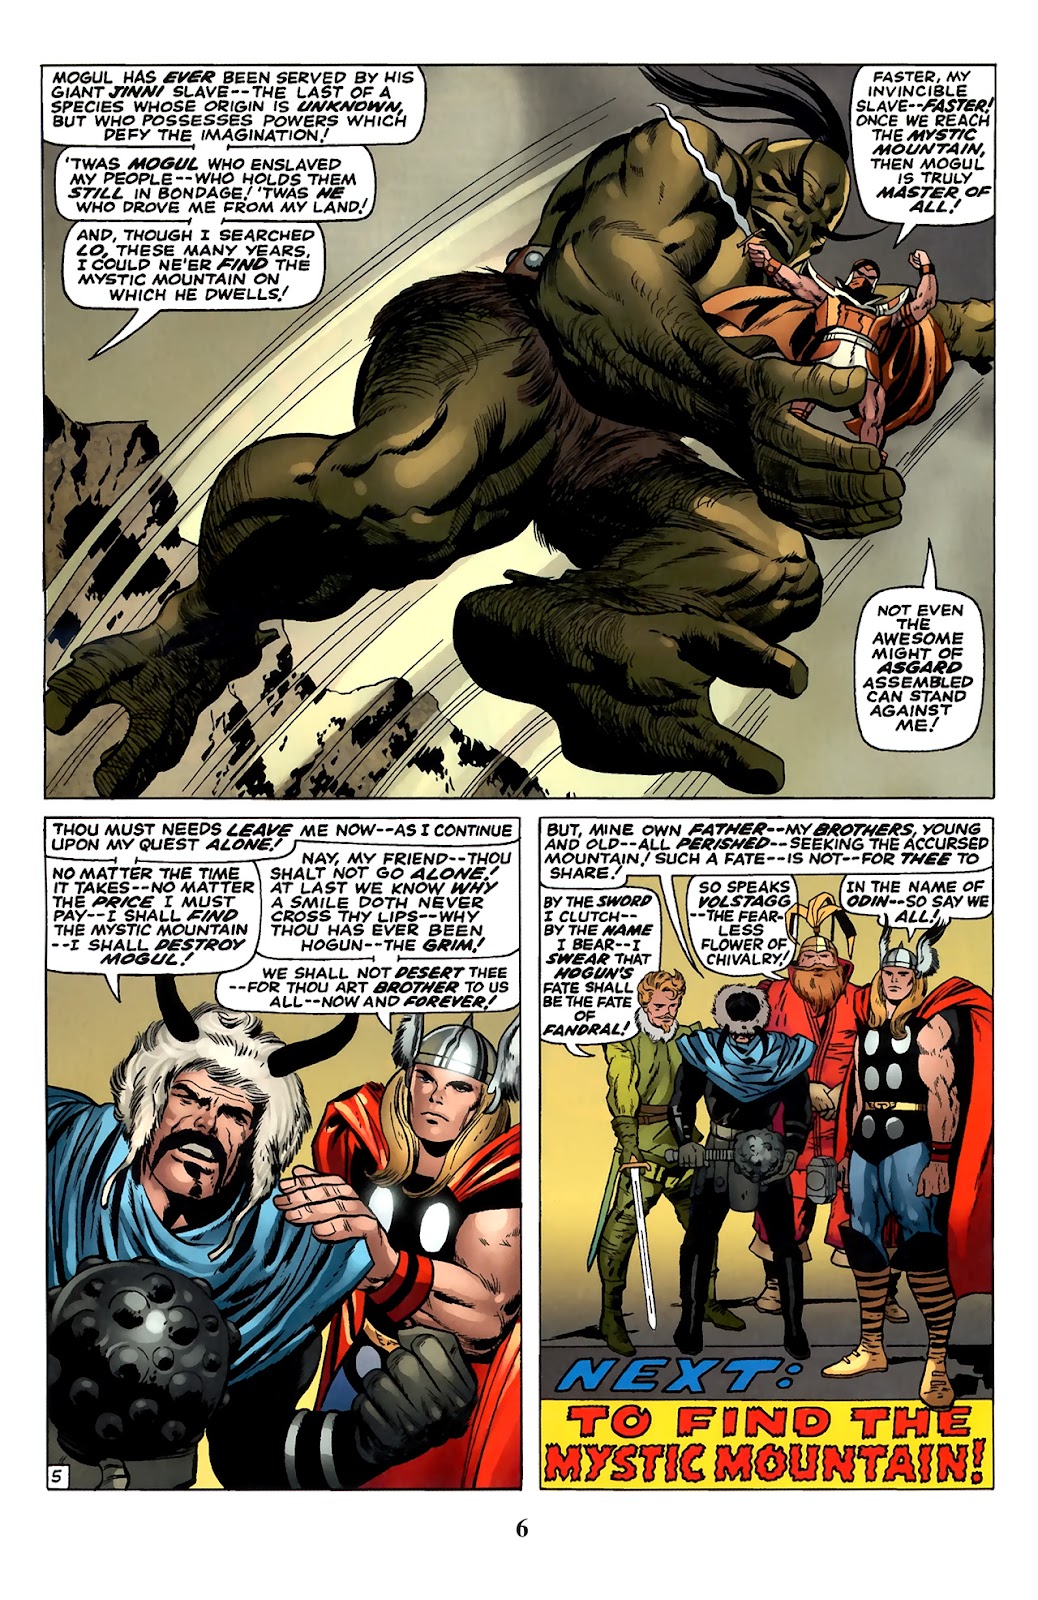 Thor: Tales of Asgard by Stan Lee & Jack Kirby issue 6 - Page 8